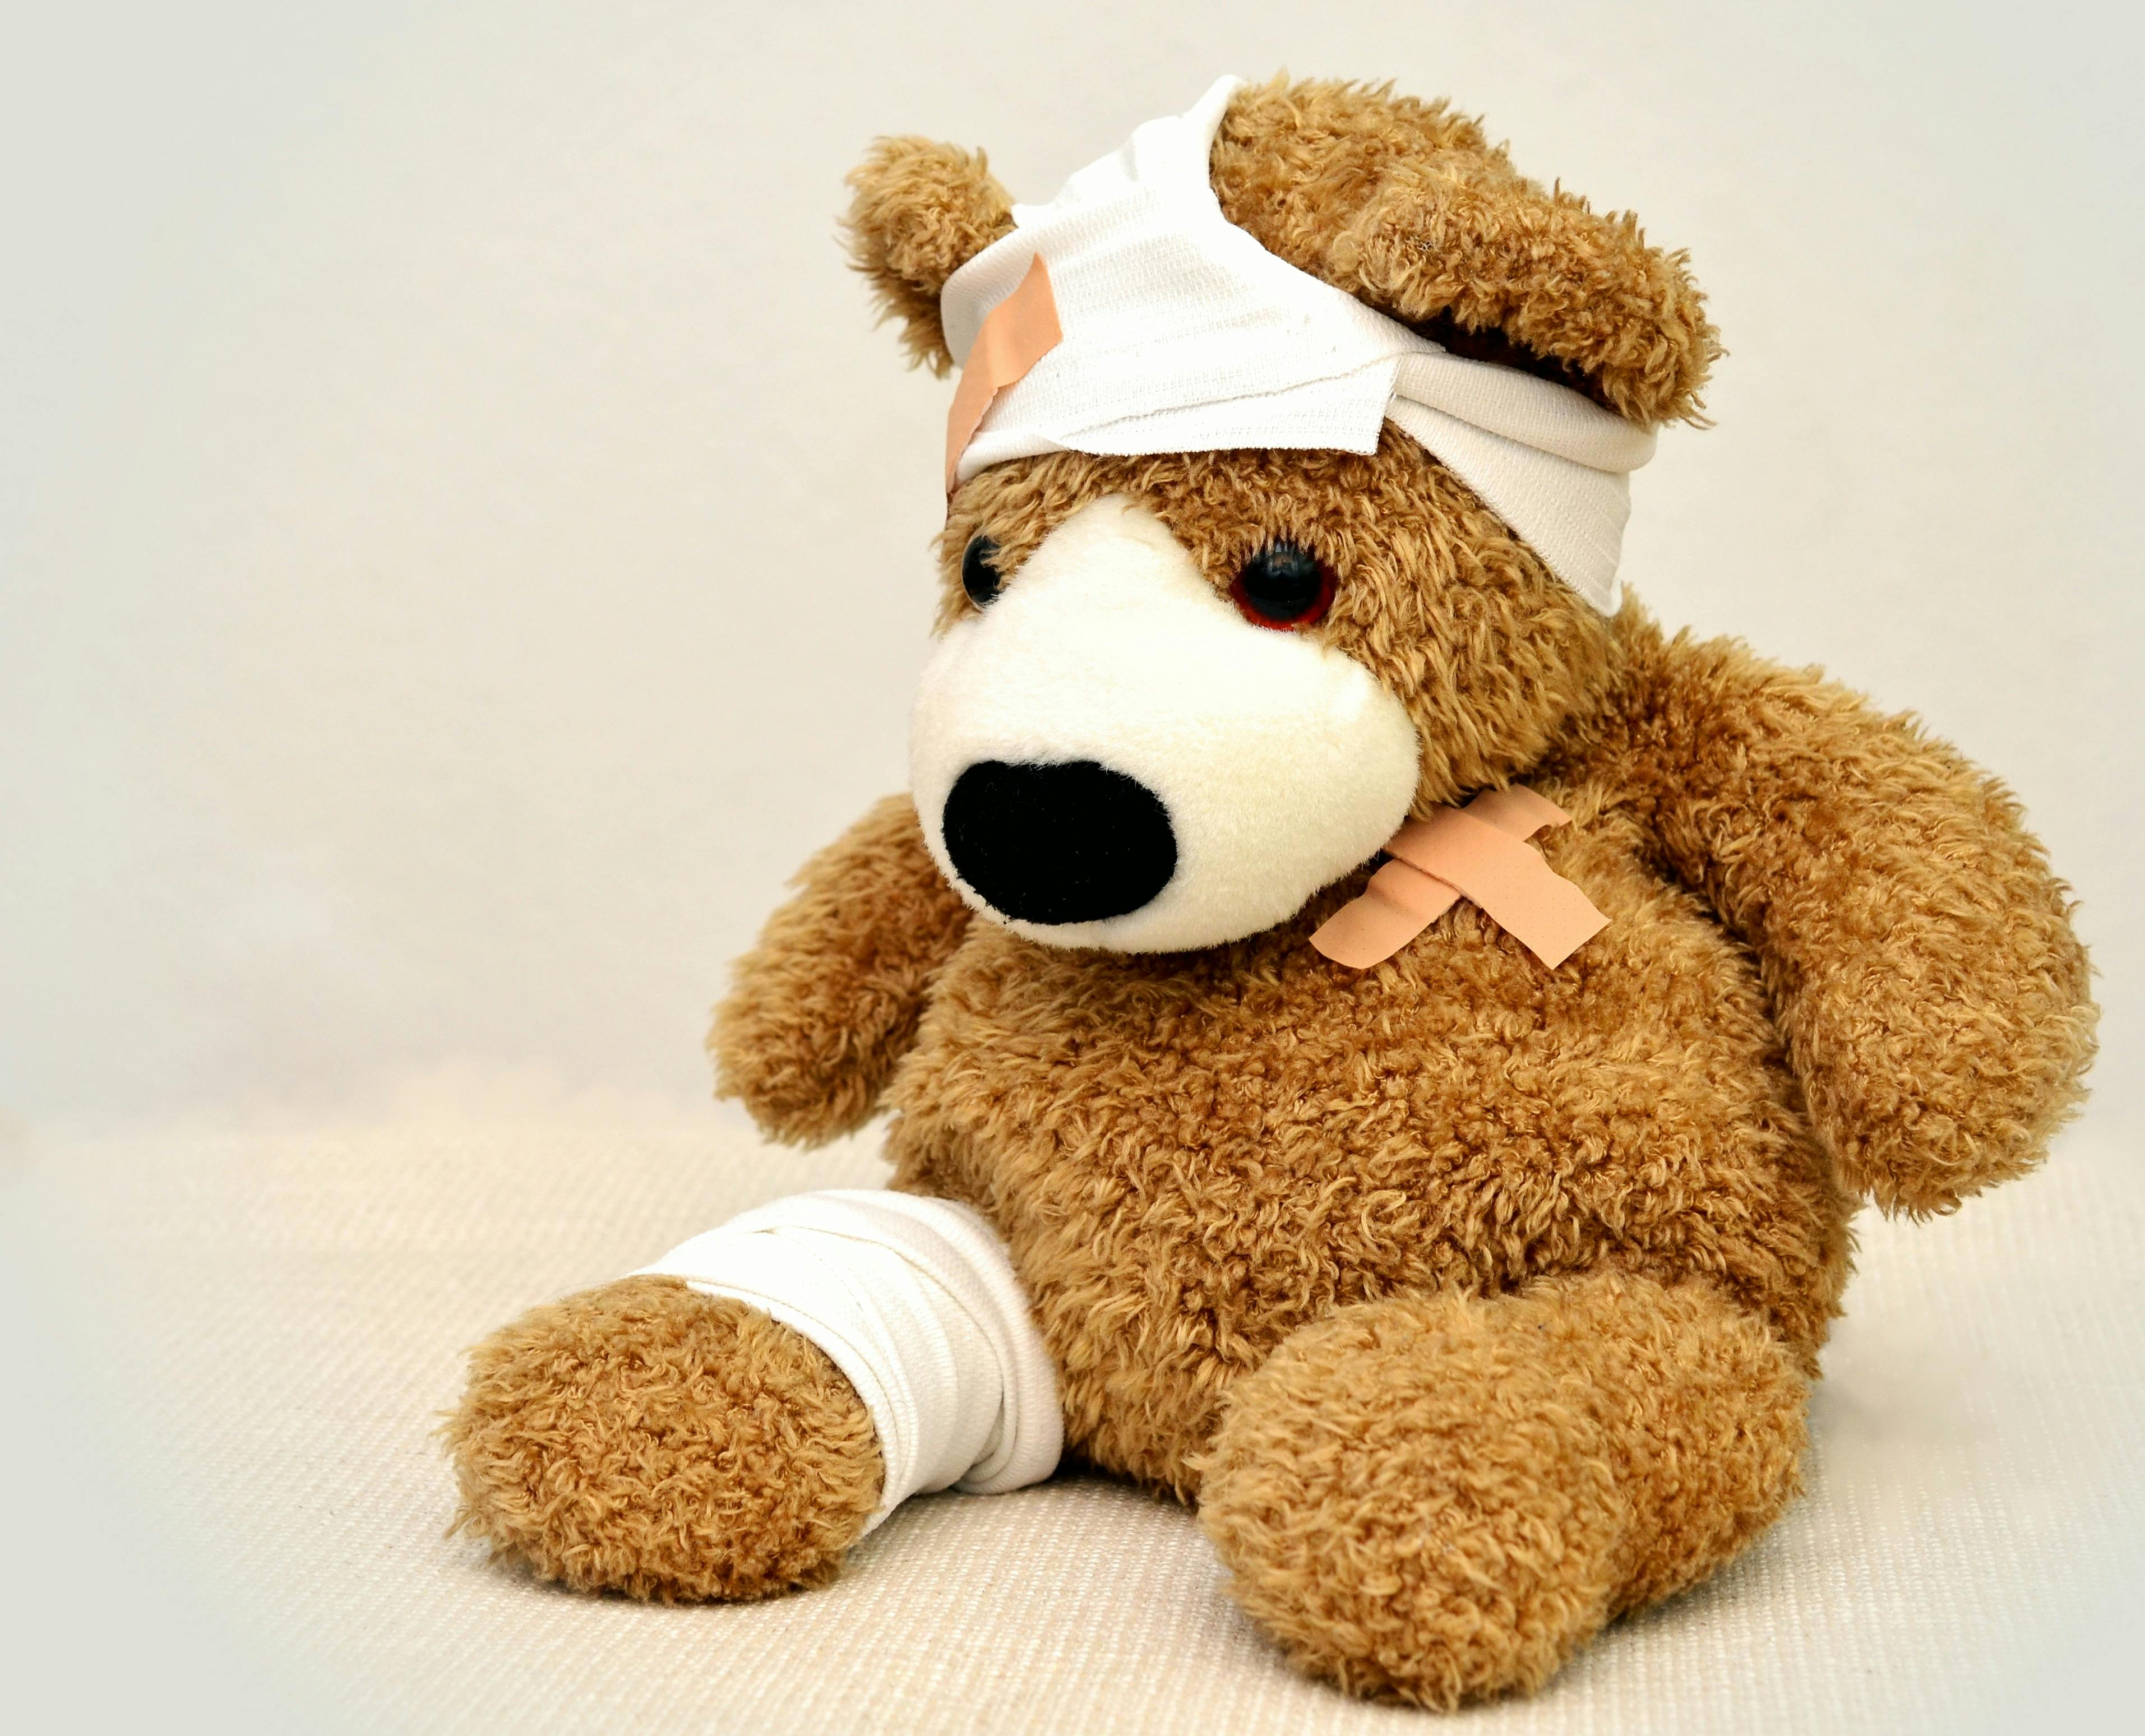 Teddy bear with bandages on its leg, head, and chest.